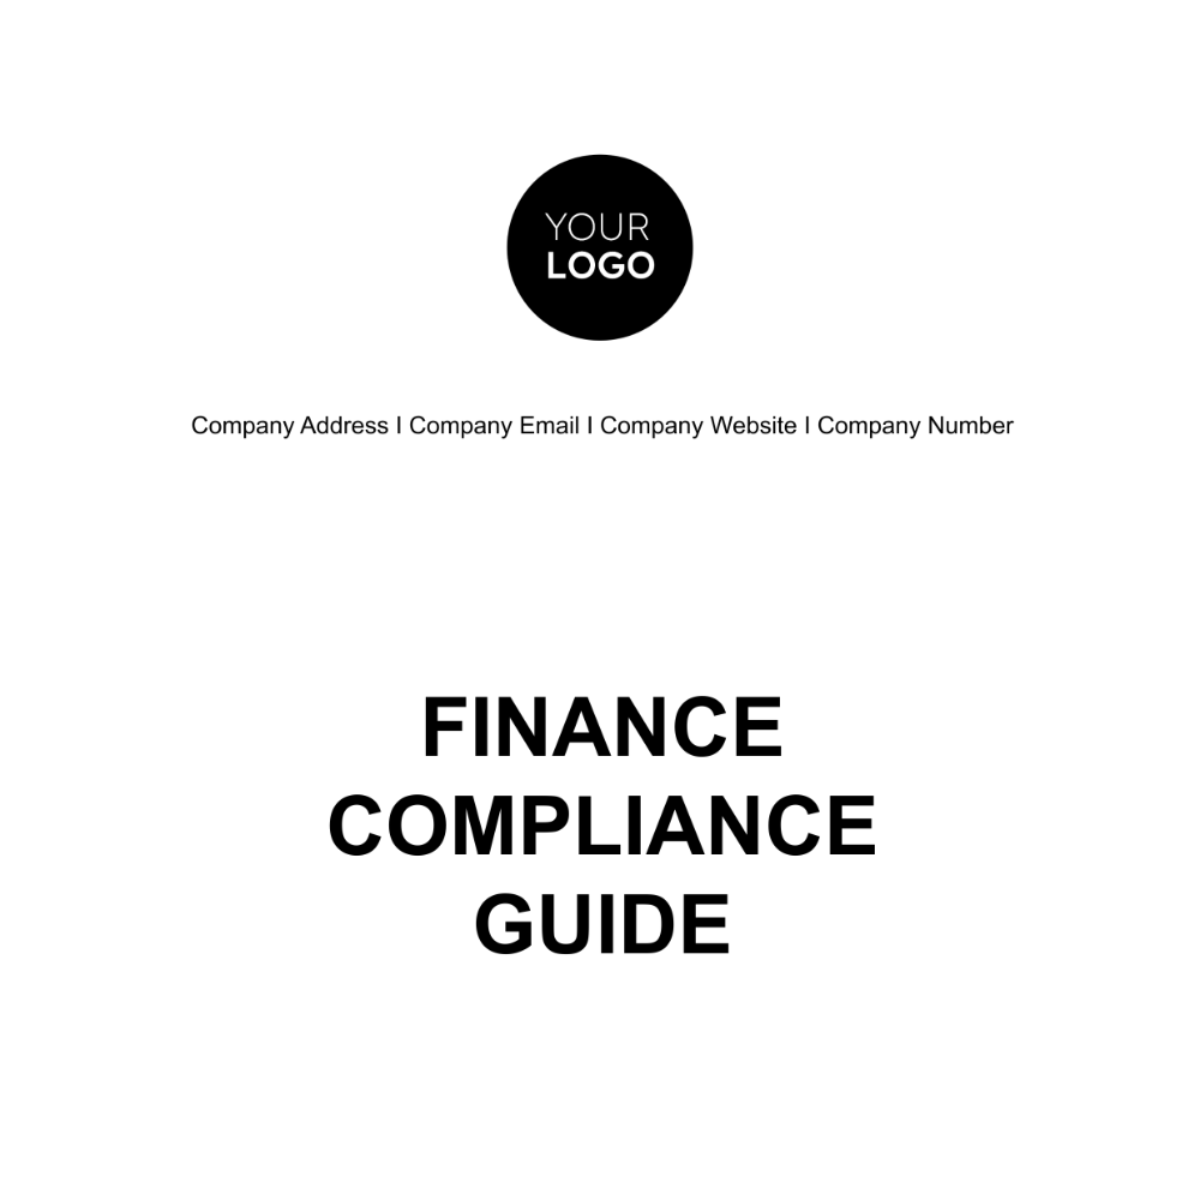 Financial Compliance Guide Template